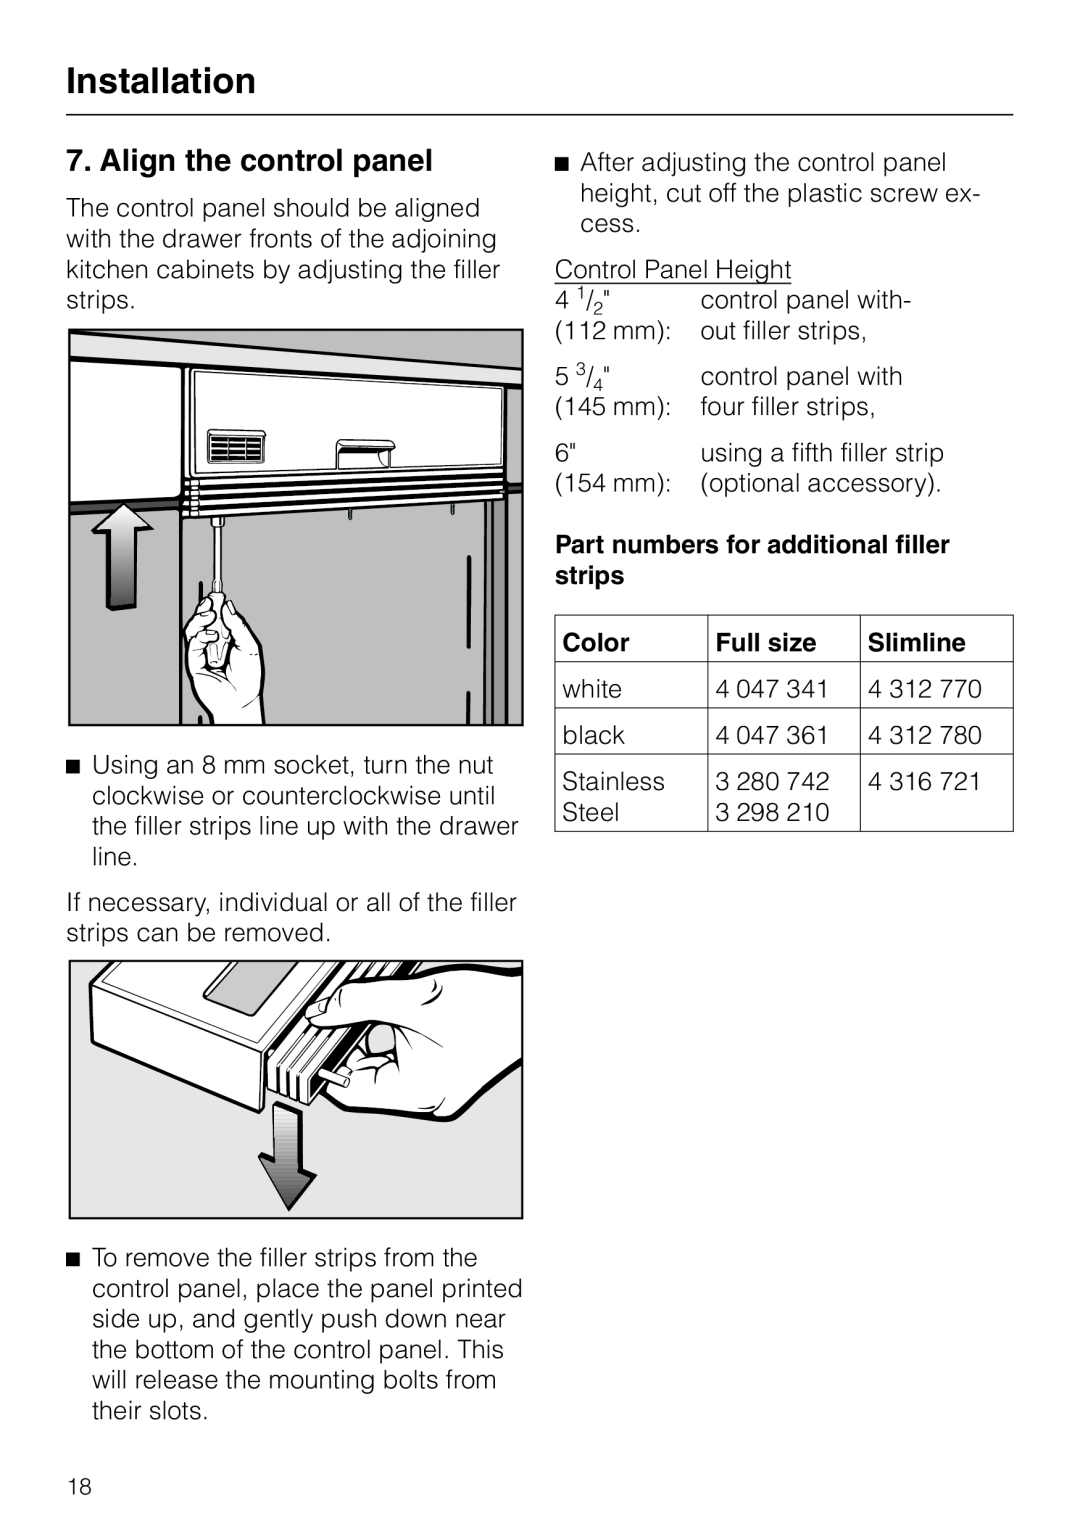 Miele HG02 Align the control panel, Part numbers for additional filler strips, Color, Full size, Slimline, Installation 